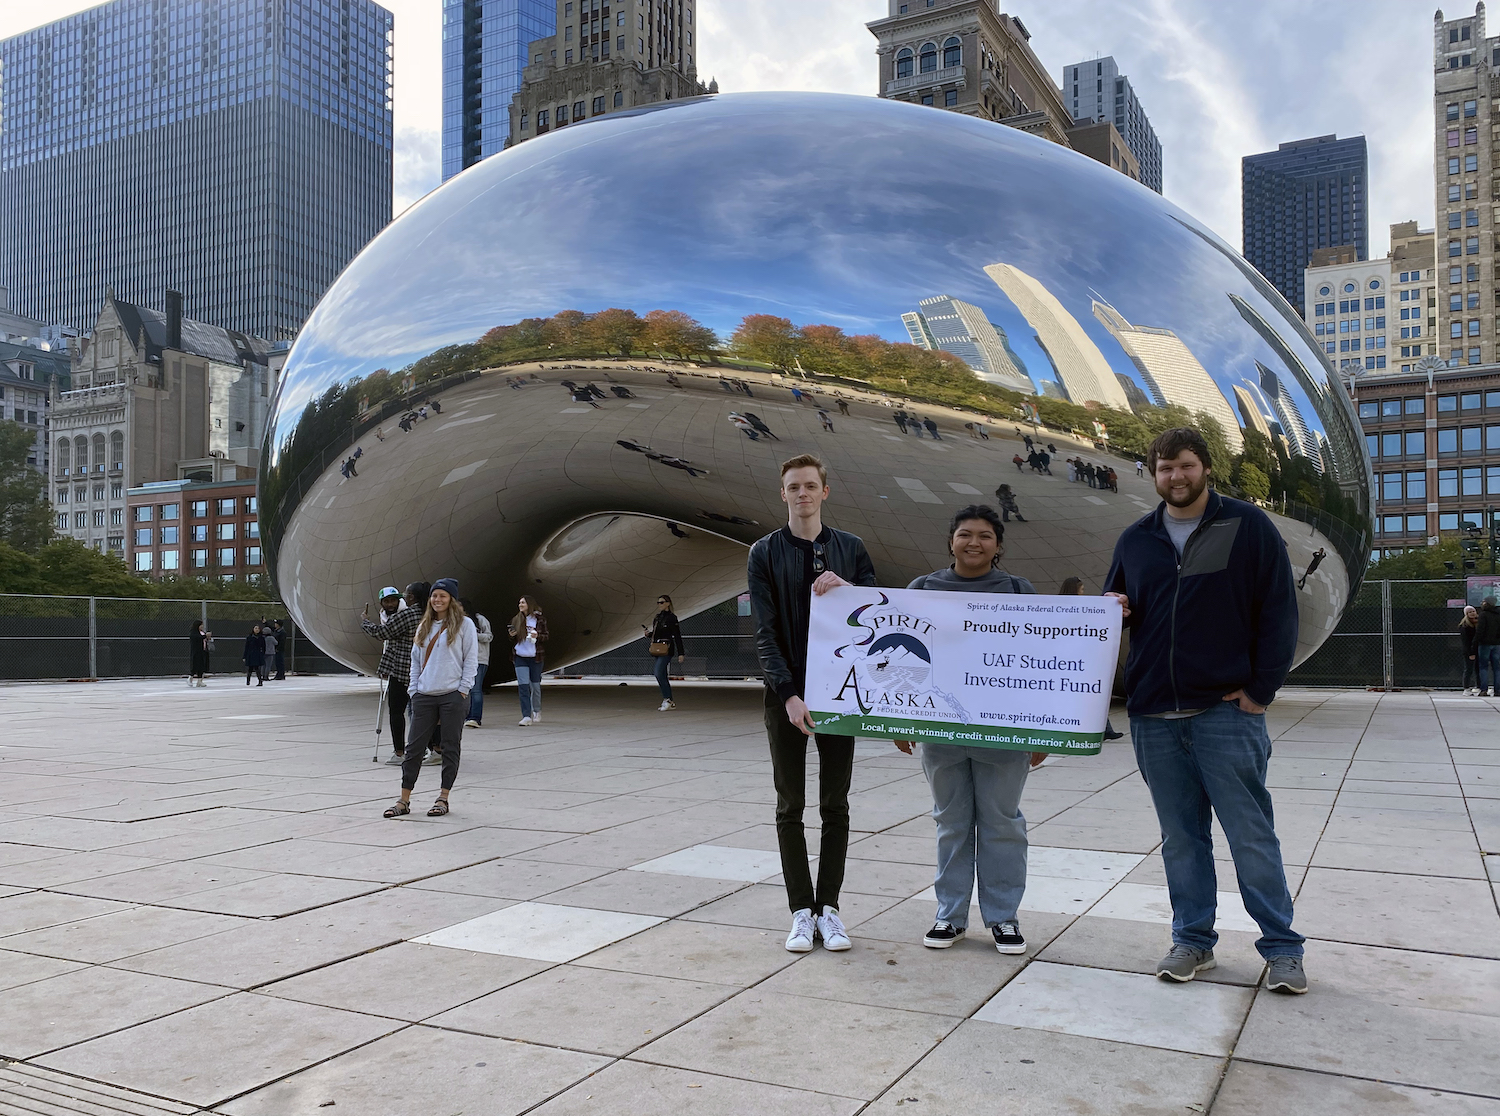 Students Nikolai Unruh, Jenifer Garcia and Bryan Sauer visit "The Bean" (officially titled “Cloud Gate”) sculpture during their trip to the 2021 Student Managed Investment Fund Consortium Conference in Chicago, Illinois. 